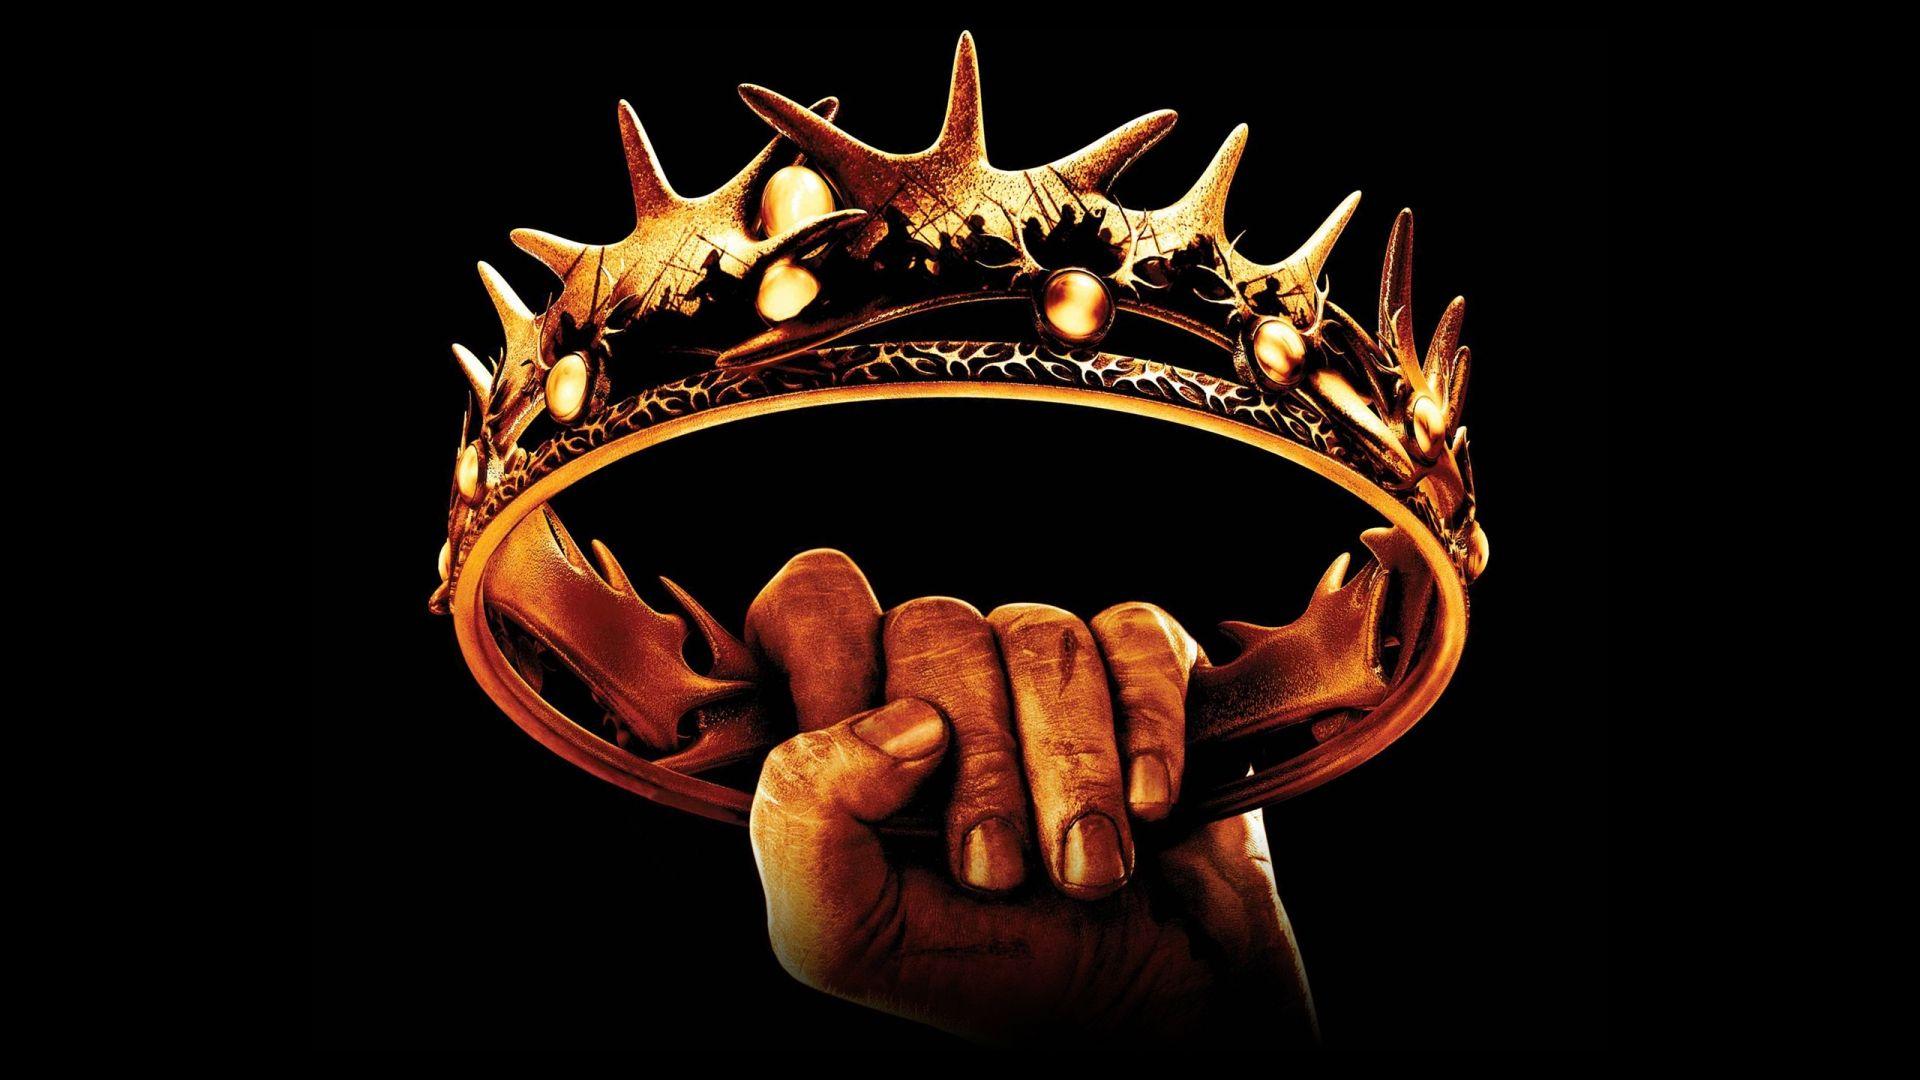 The King's Crown Game Of Thrones Wallpaper